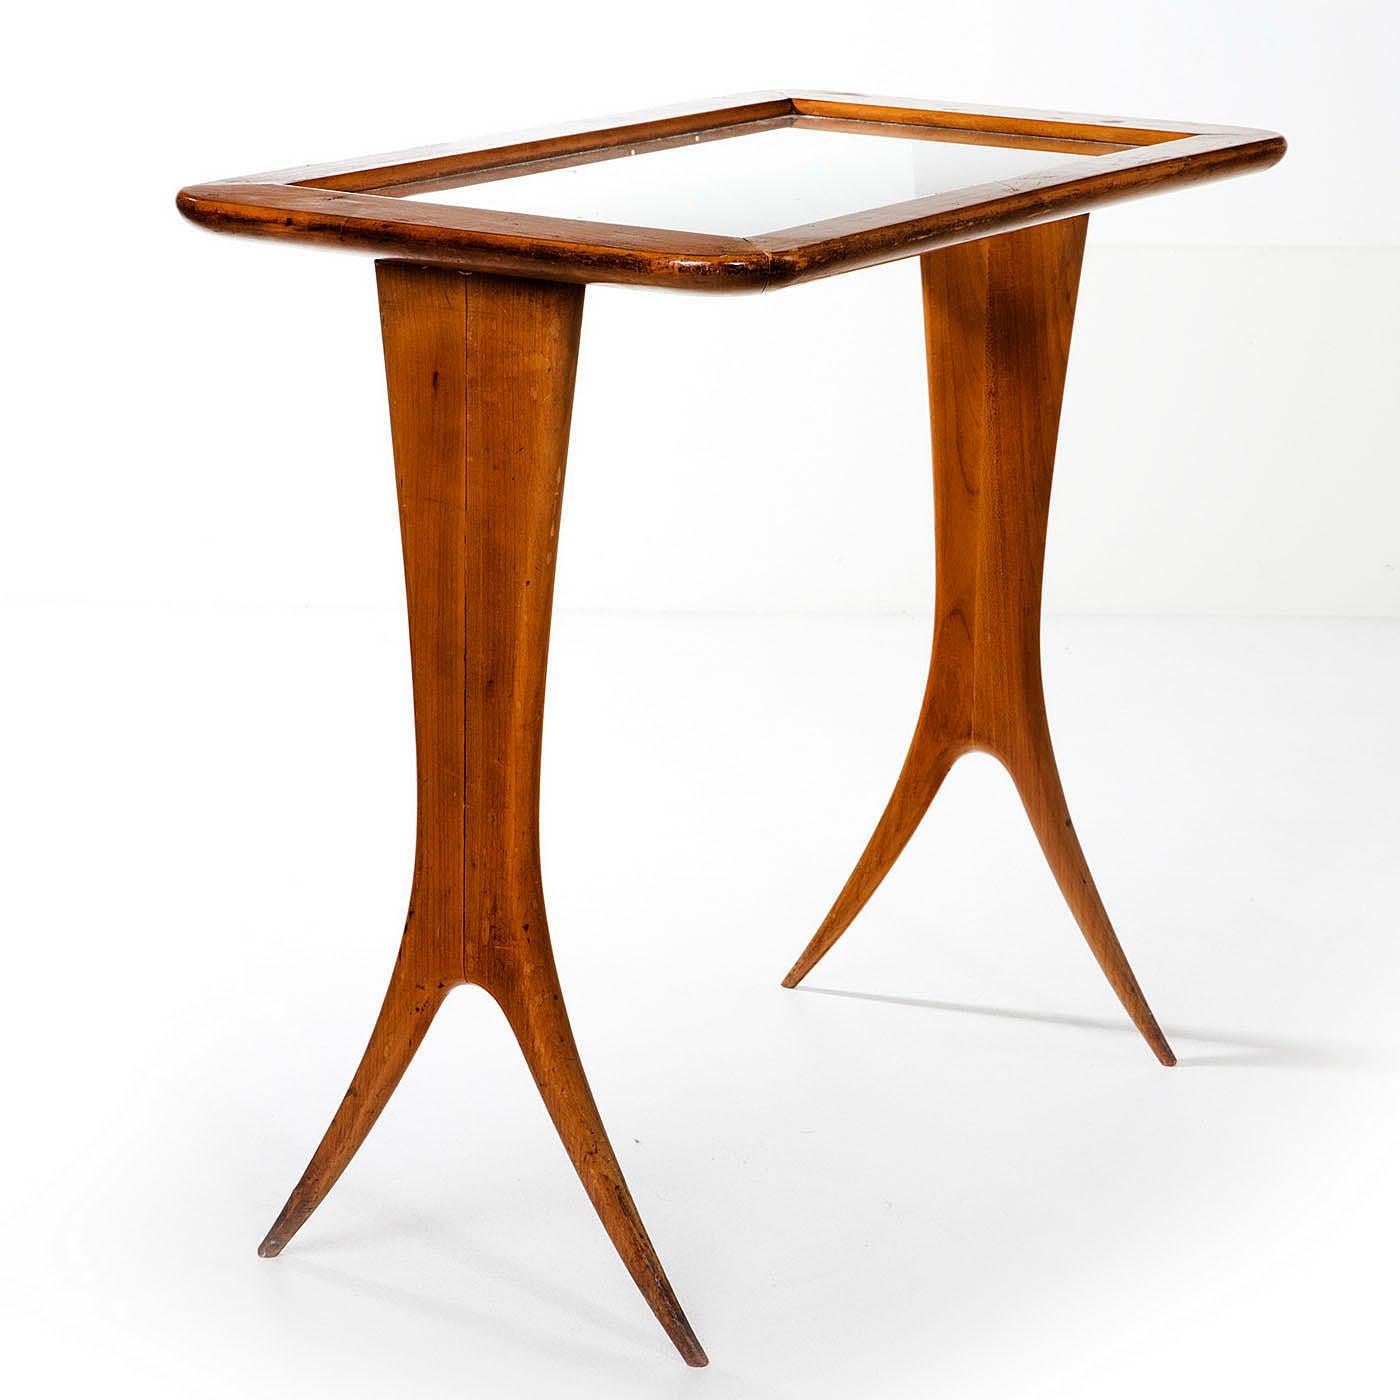 Set of good quality walnut nesting tables with glass tops by Raphael (1912 - 2000). These elegant tables are very sculptural and also eminently usable as they have glass tops so they can also be used for hot drinks. They are very light i so can